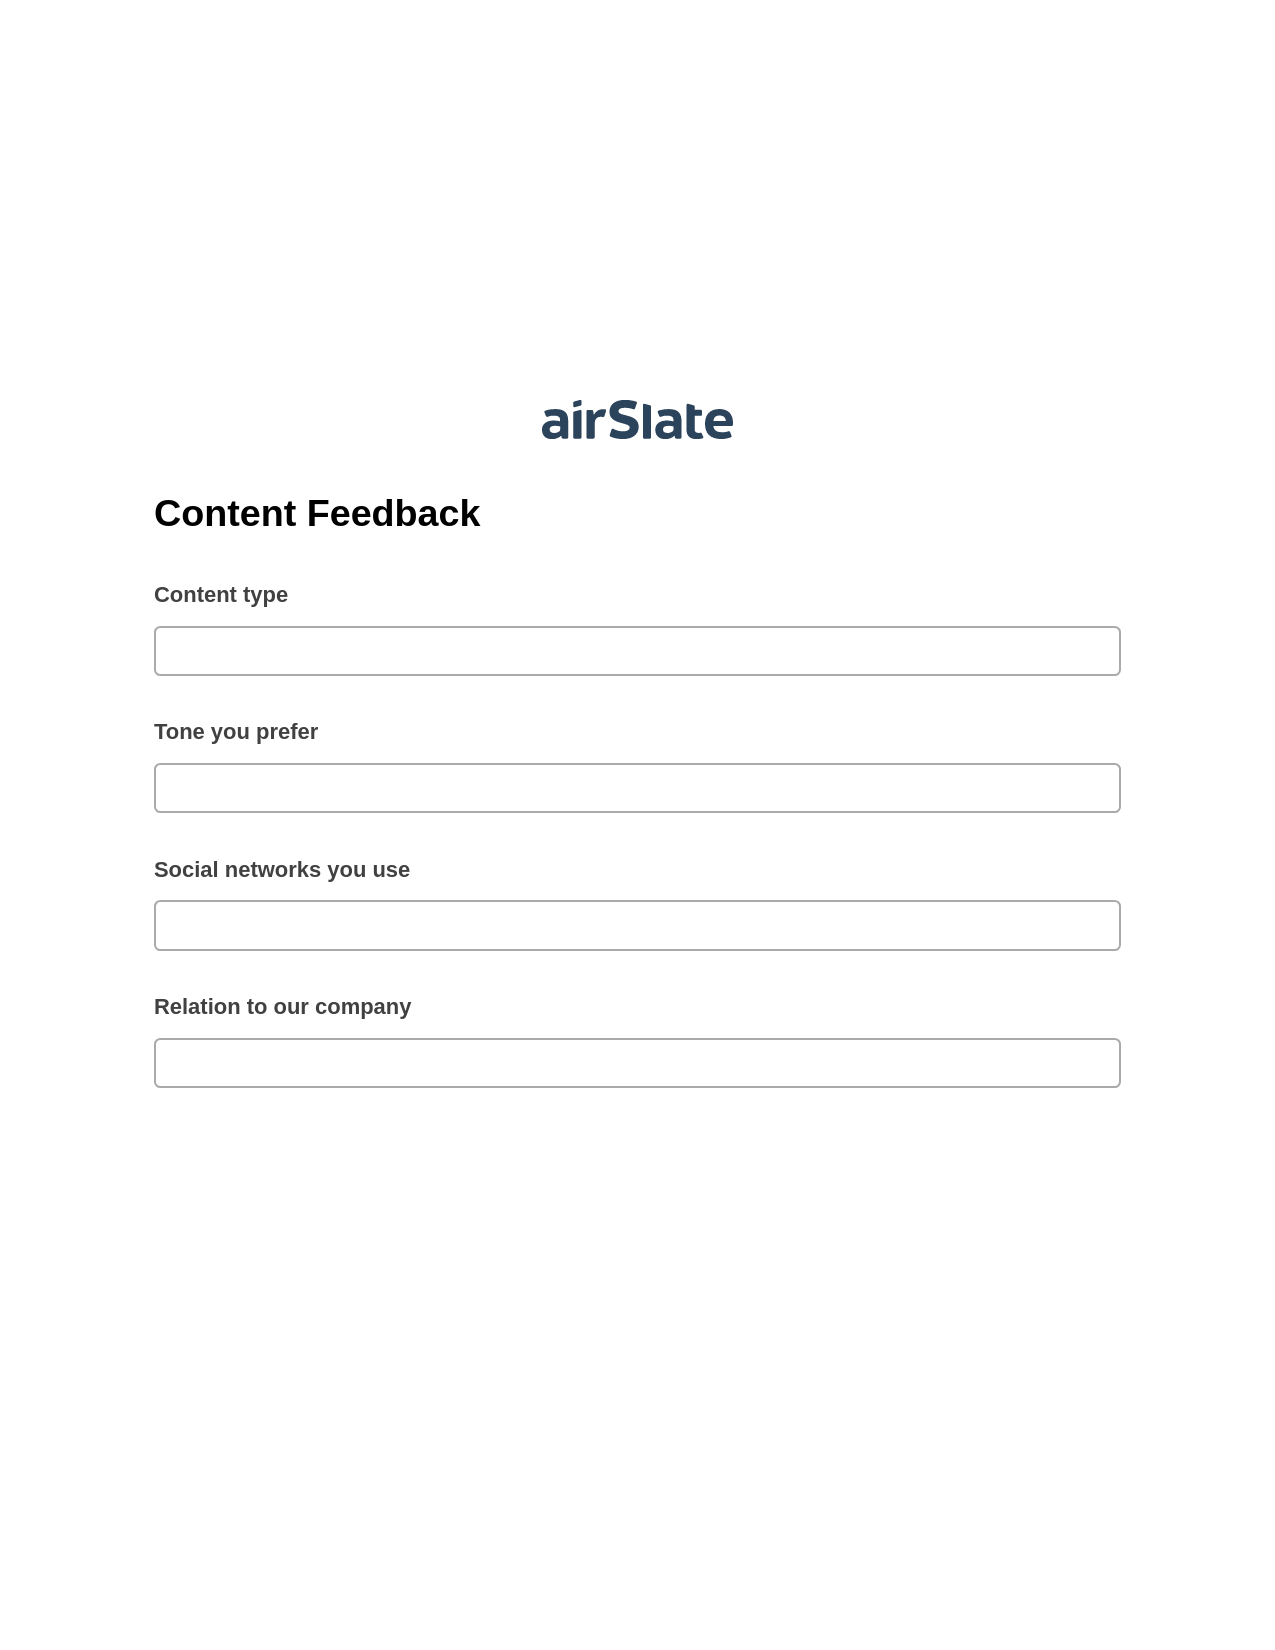 Multirole Content Feedback Pre-fill Slate from MS Dynamics 365 Records Bot, Slack Notification Bot, Export to Excel 365 Bot